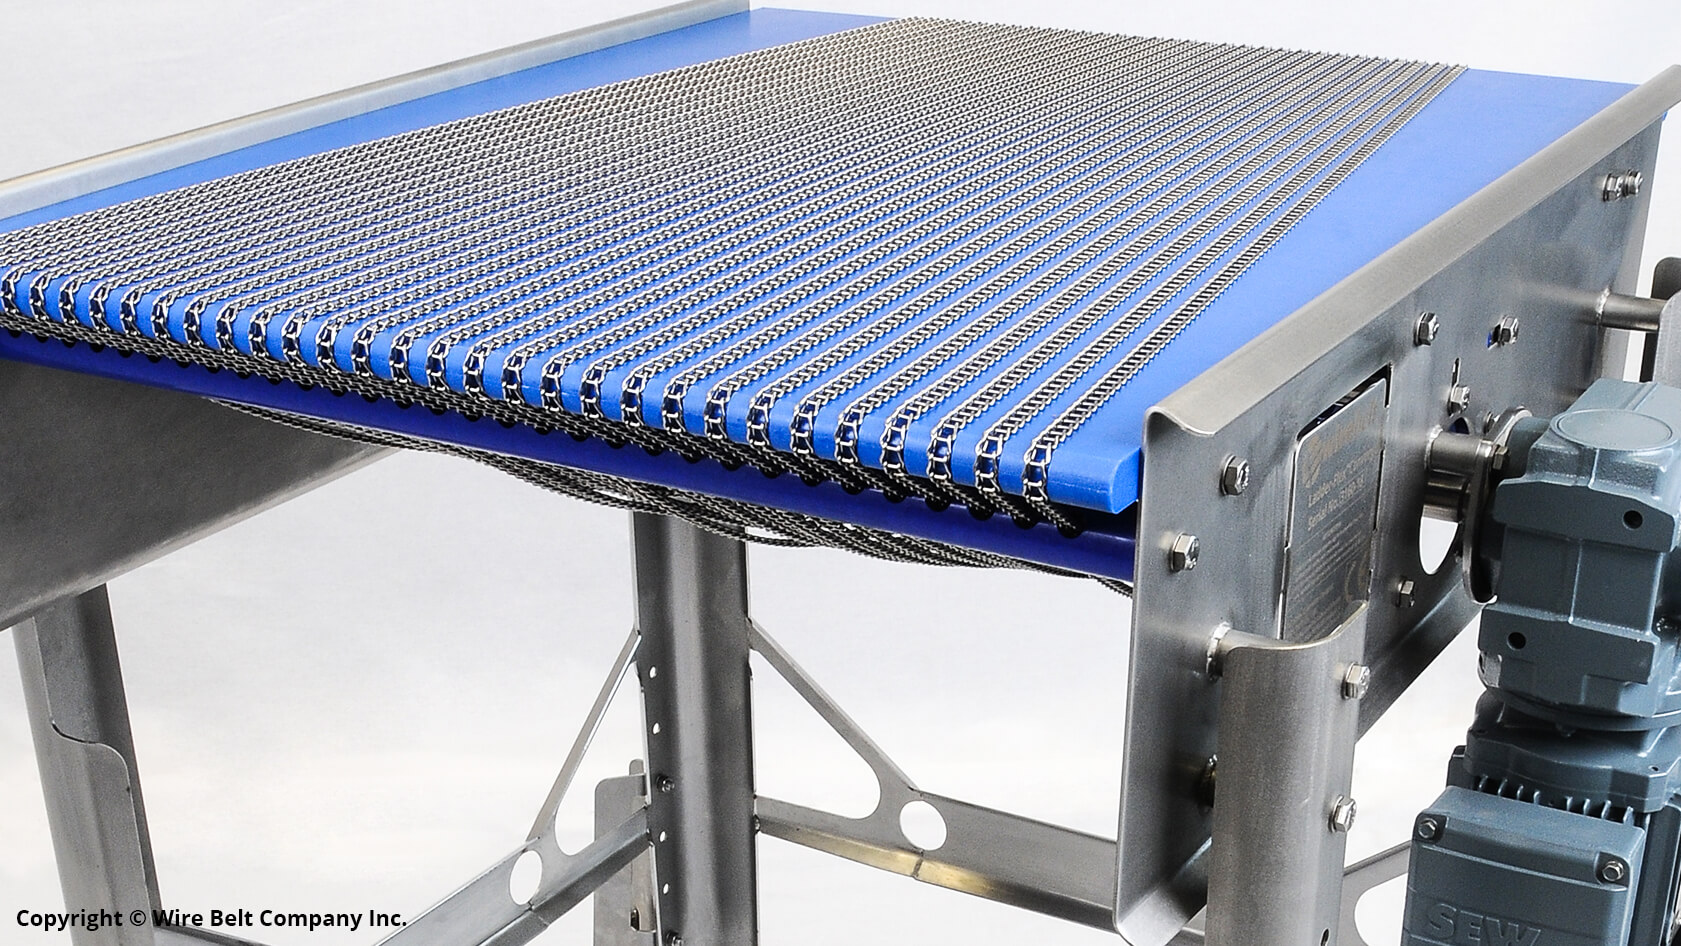 The Applications of Ladder-Flex™ Conveyors